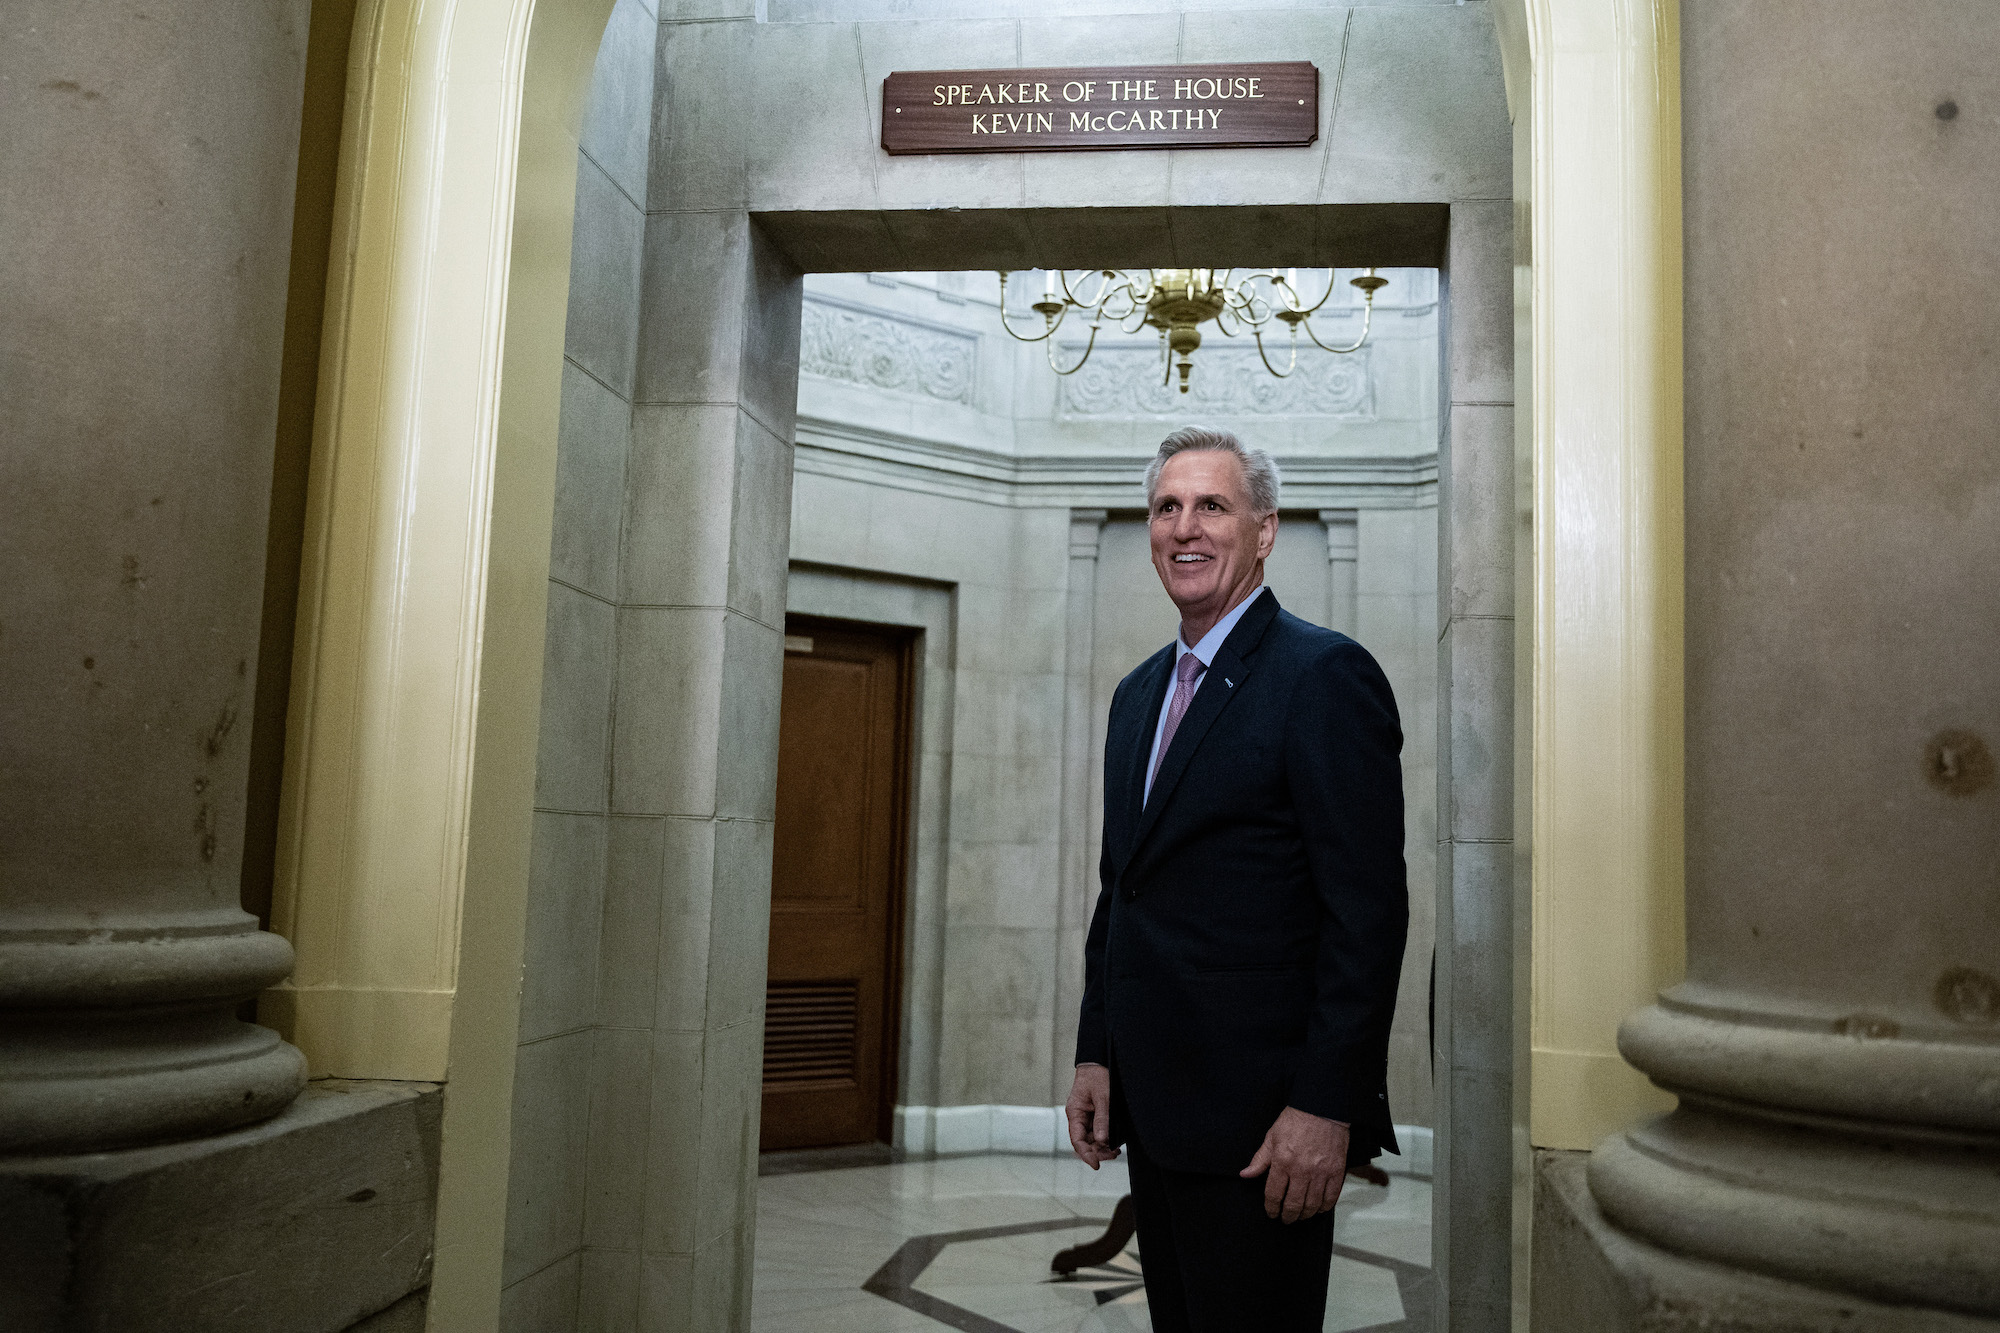 Kevin McCarthy stands under the Speaker of the House sign outside his office on Saturday morning.